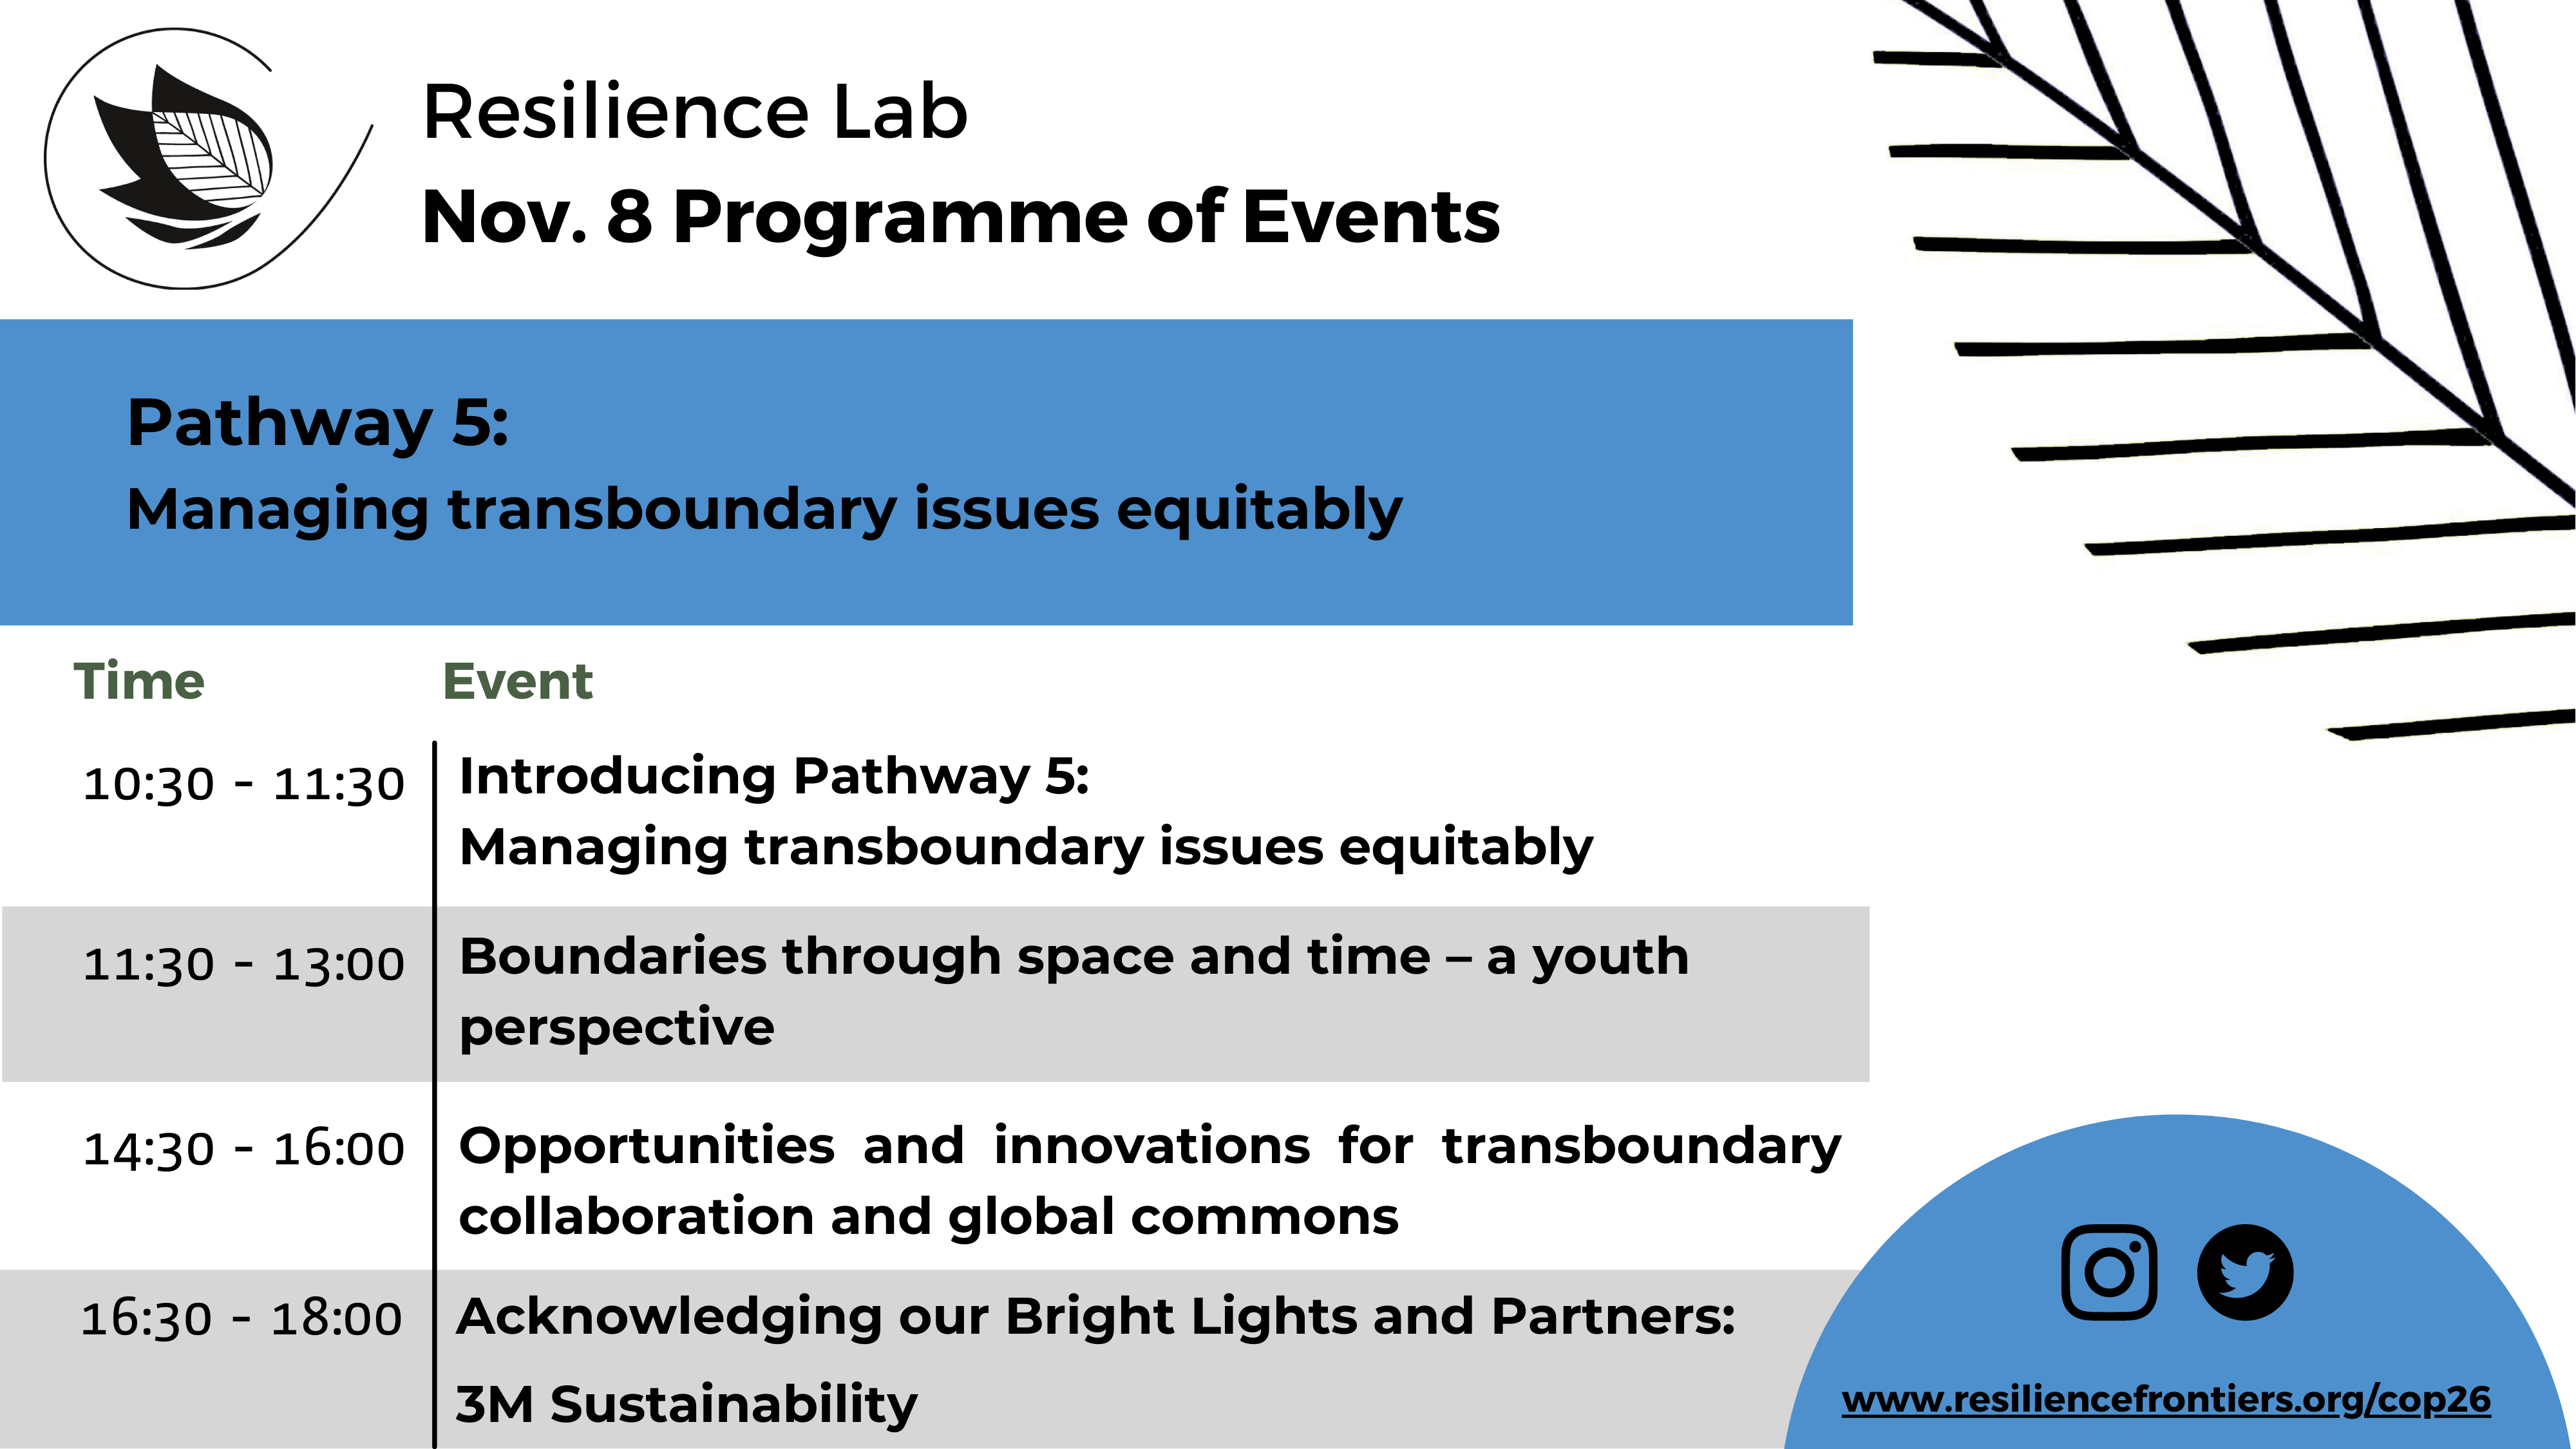 Resilience Lab Day 6 Programme of Events